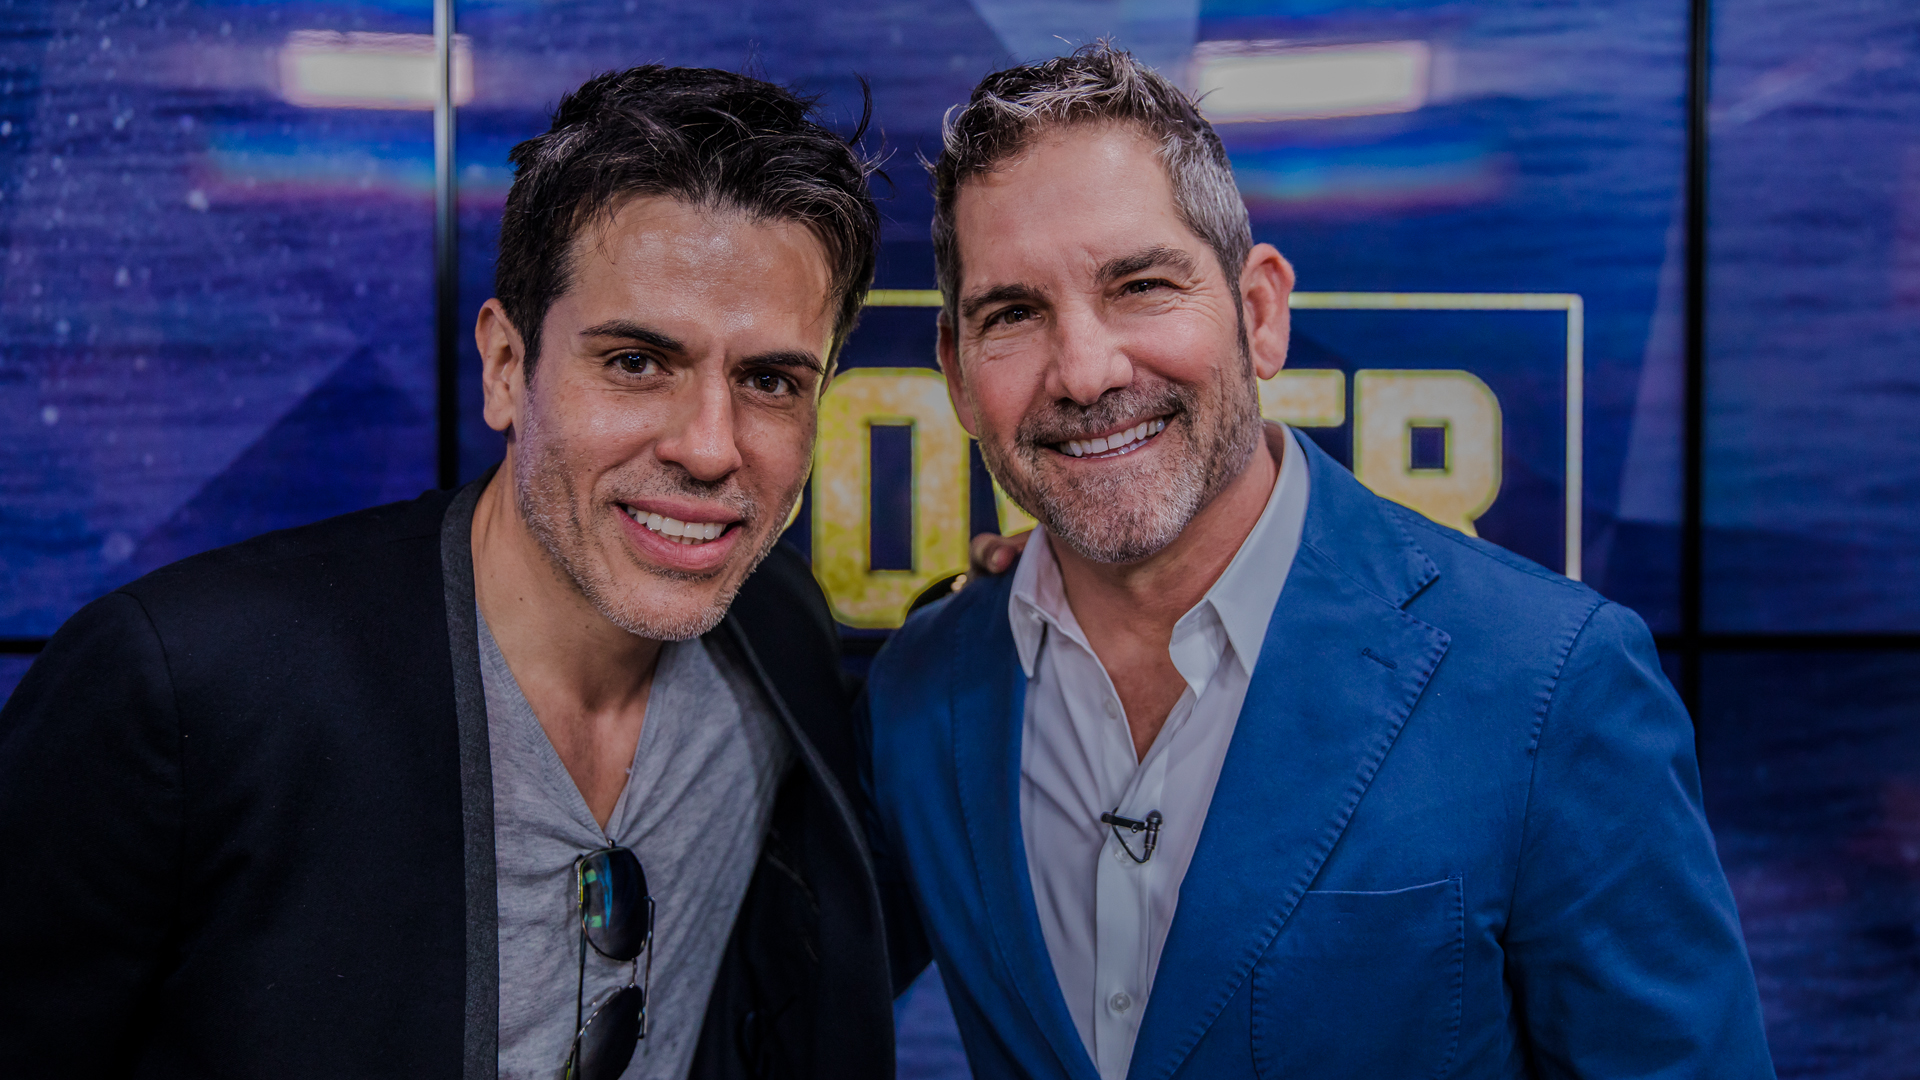 Edwin Arroyave with Grant Cardone on Power Players TV Show.